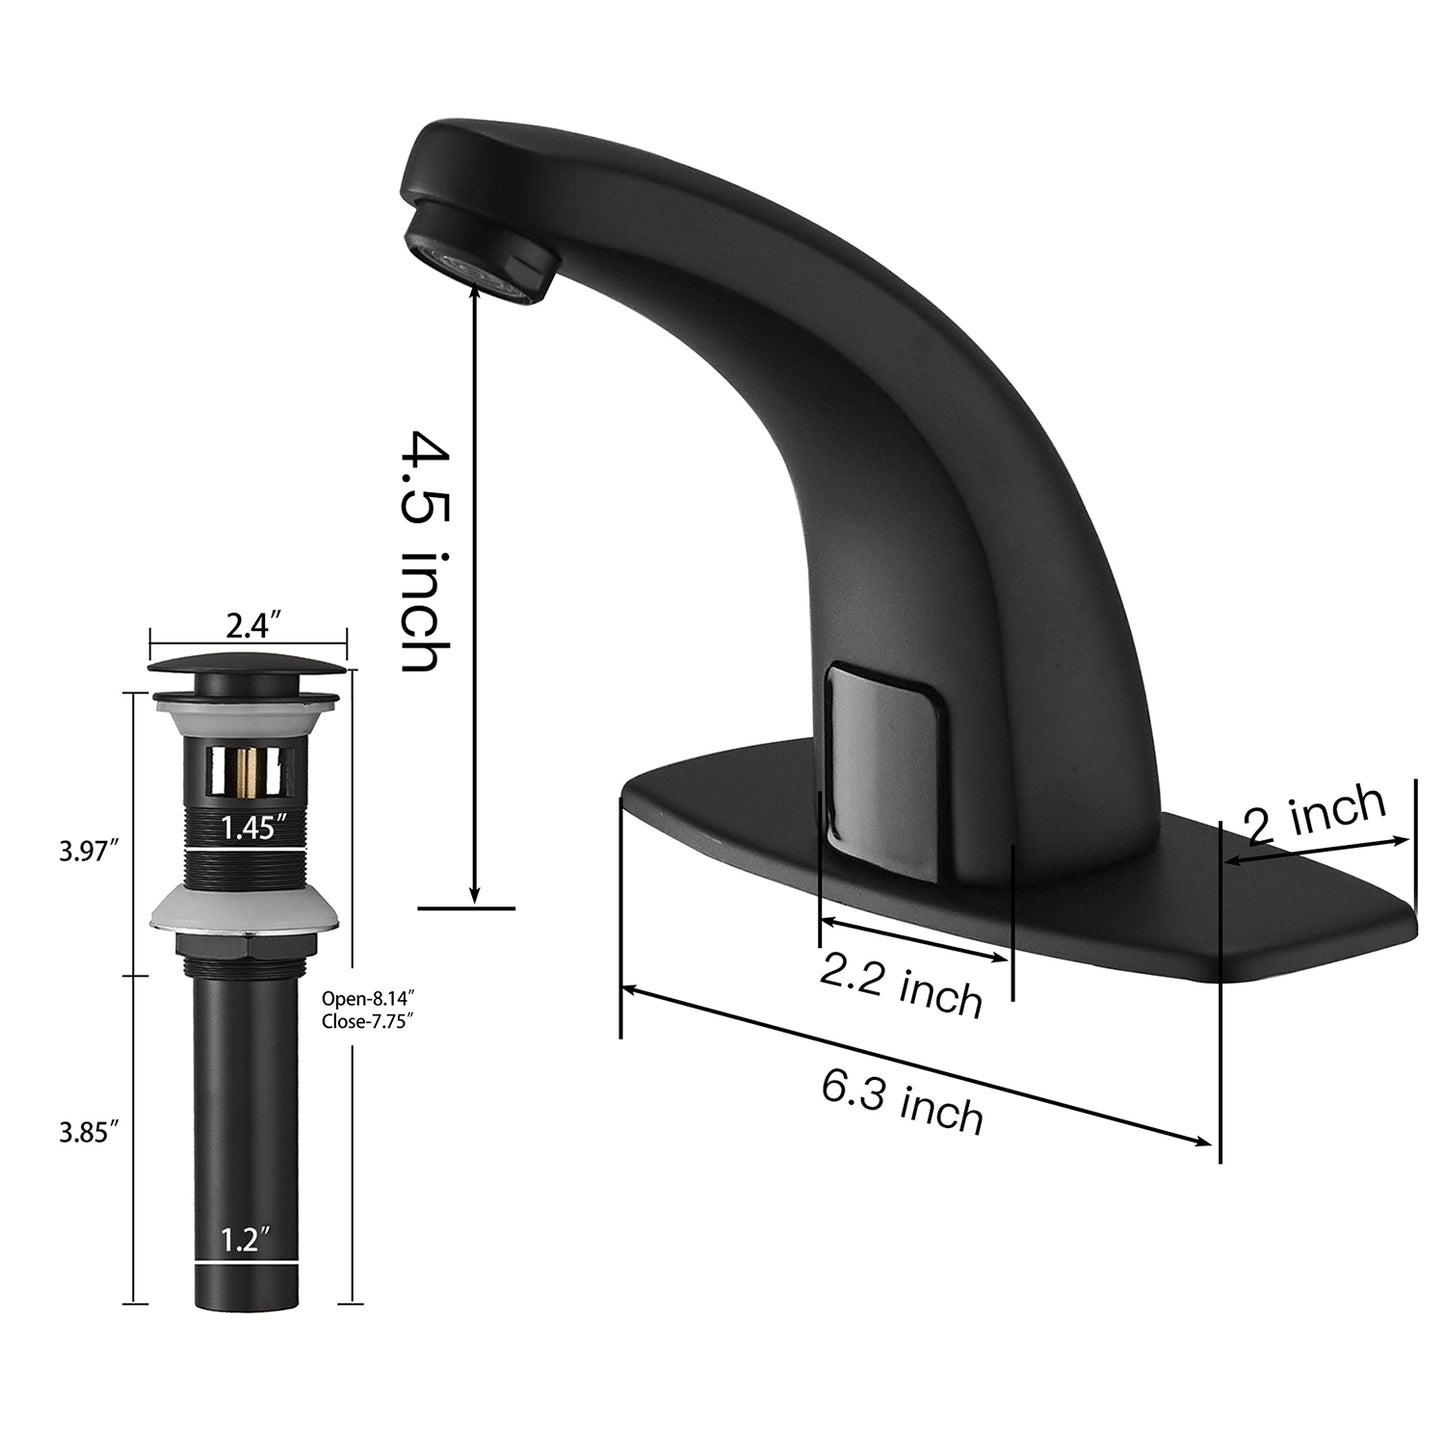 Matte Black DC Powered Touchless Bathroom Faucet with Deck Plate & Pop Up Drain